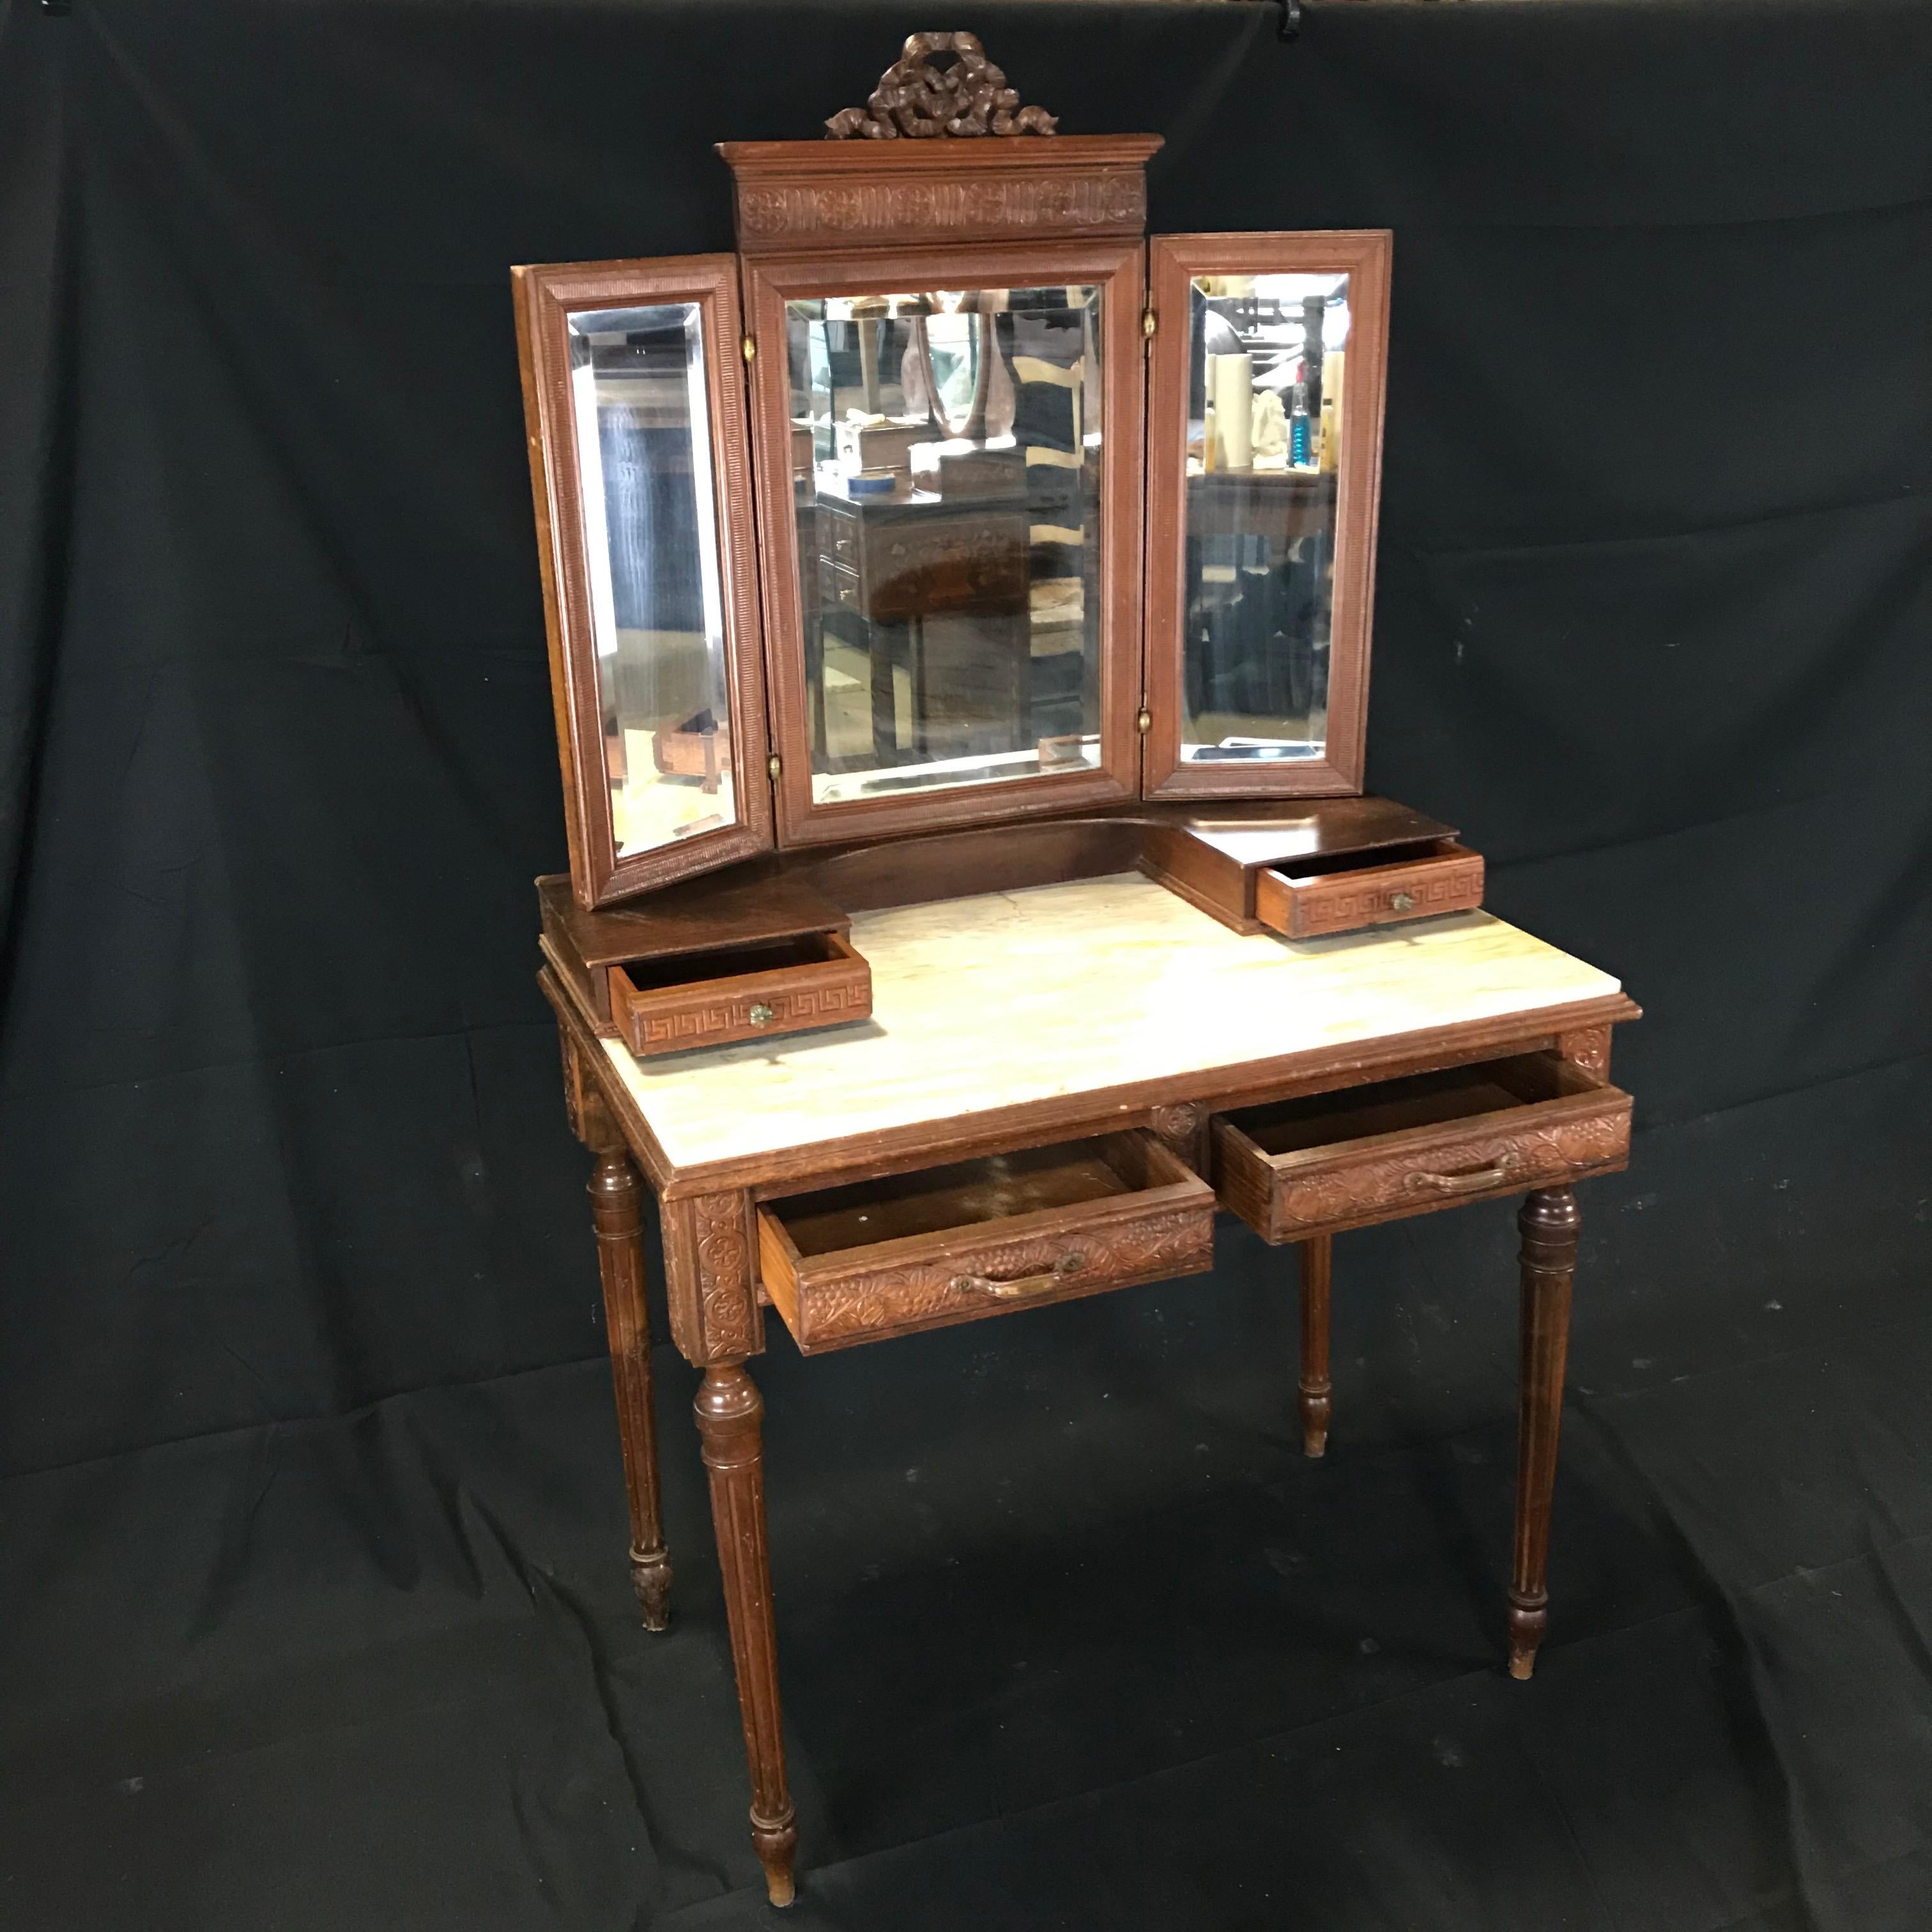 Carrara marble topped French dressing table with beveled mirrors, the side mirrors moveable, with two small drawers on the desktop and two drawers underneath the tabletop, carved walnut frieze and reeded tapering legs. 
 
#4802
Measures: H desk